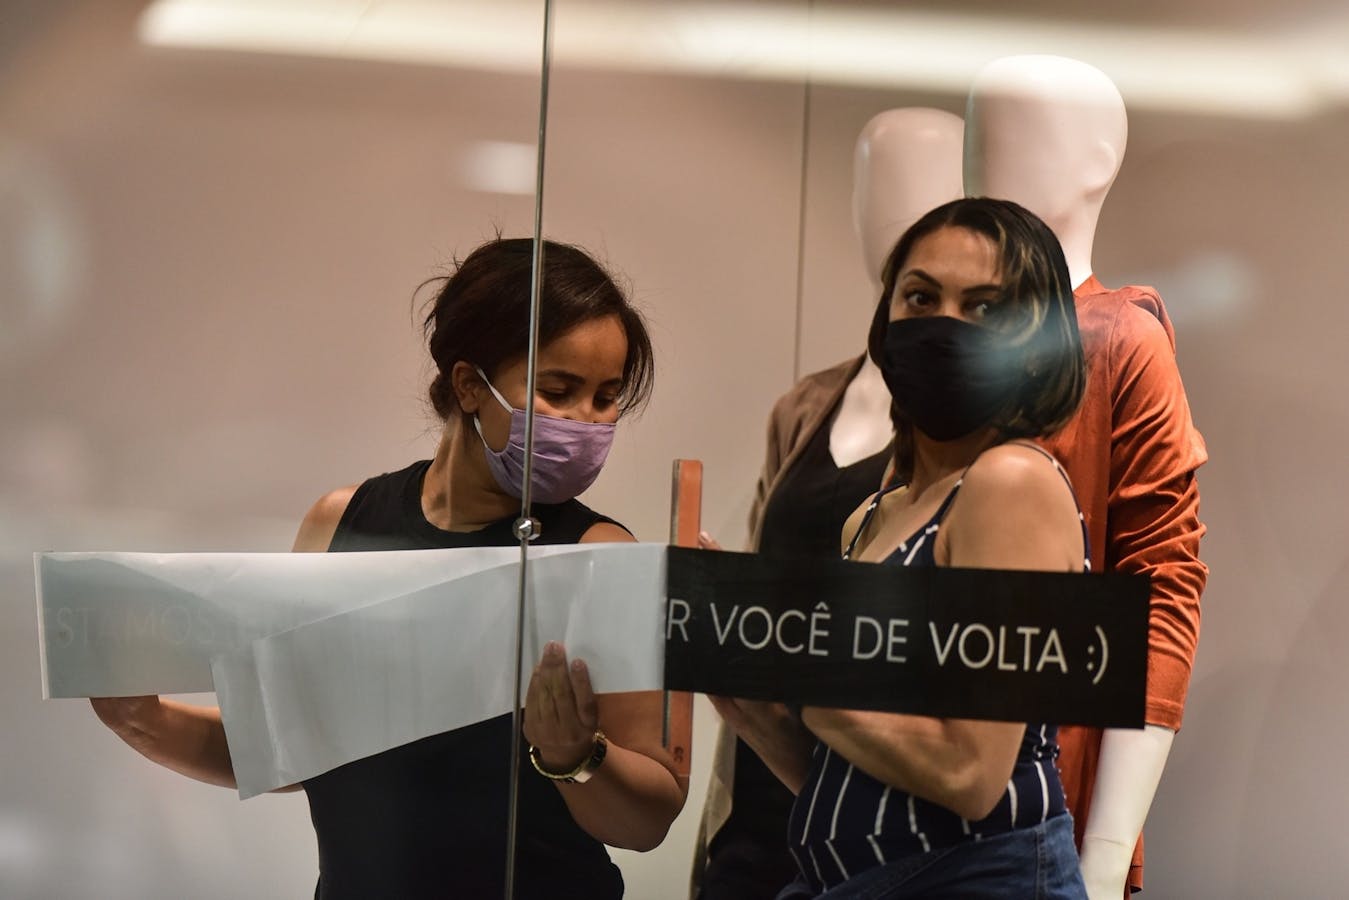 Workers at a store in Brazil, in May 2020. With more shoppers at home, online e-commerce surged in Brazil and elsewhere in Latin America last year. Photo: Bloomberg